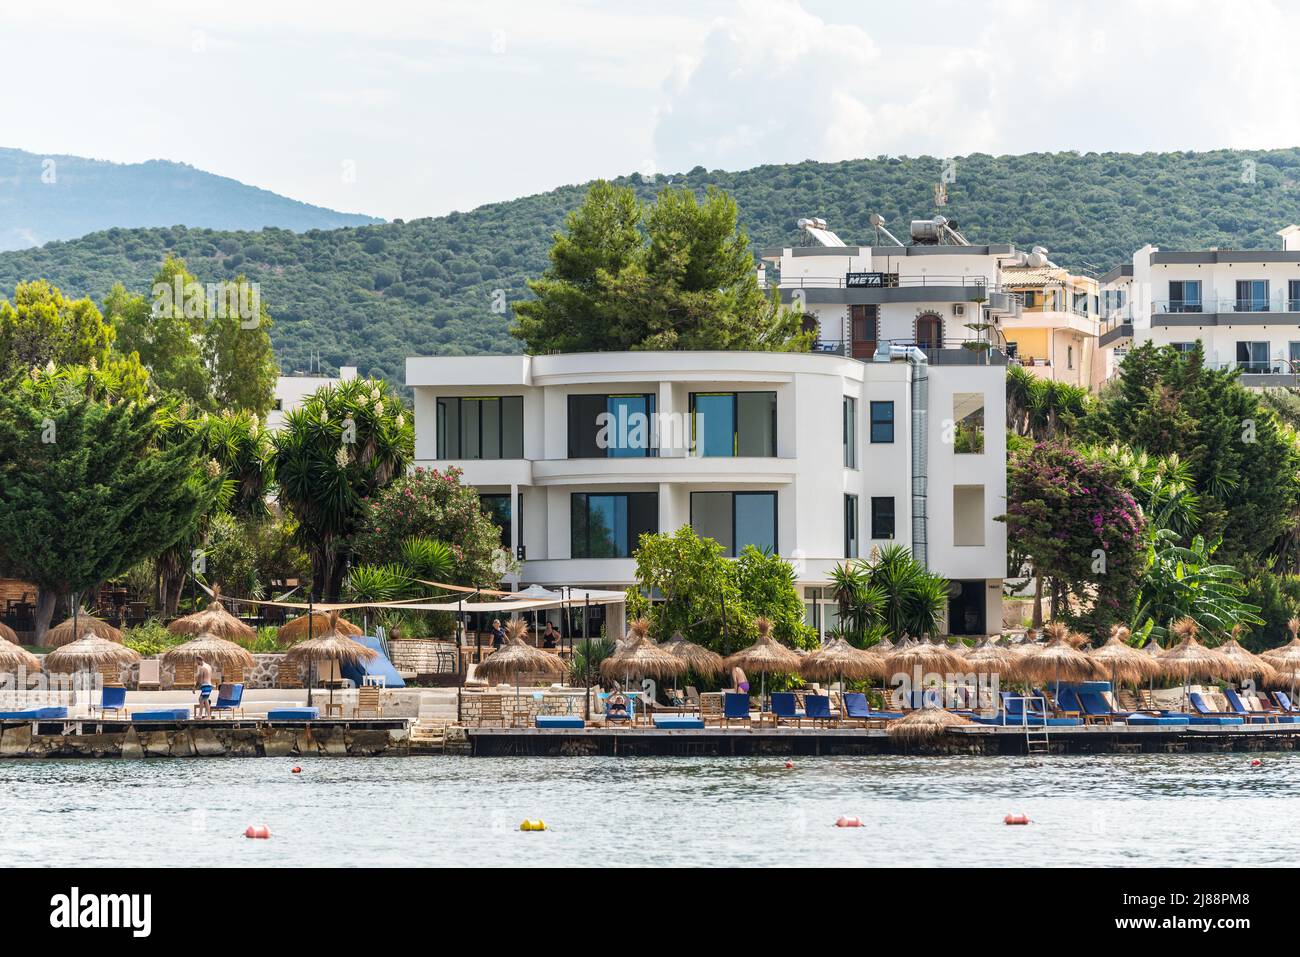 Ksamil, Albania - September 9, 2021: View of the Manta Resort and other hotels in Ksamil, Albania. Beautiful destinations. Traveling concept backgroun Stock Photo